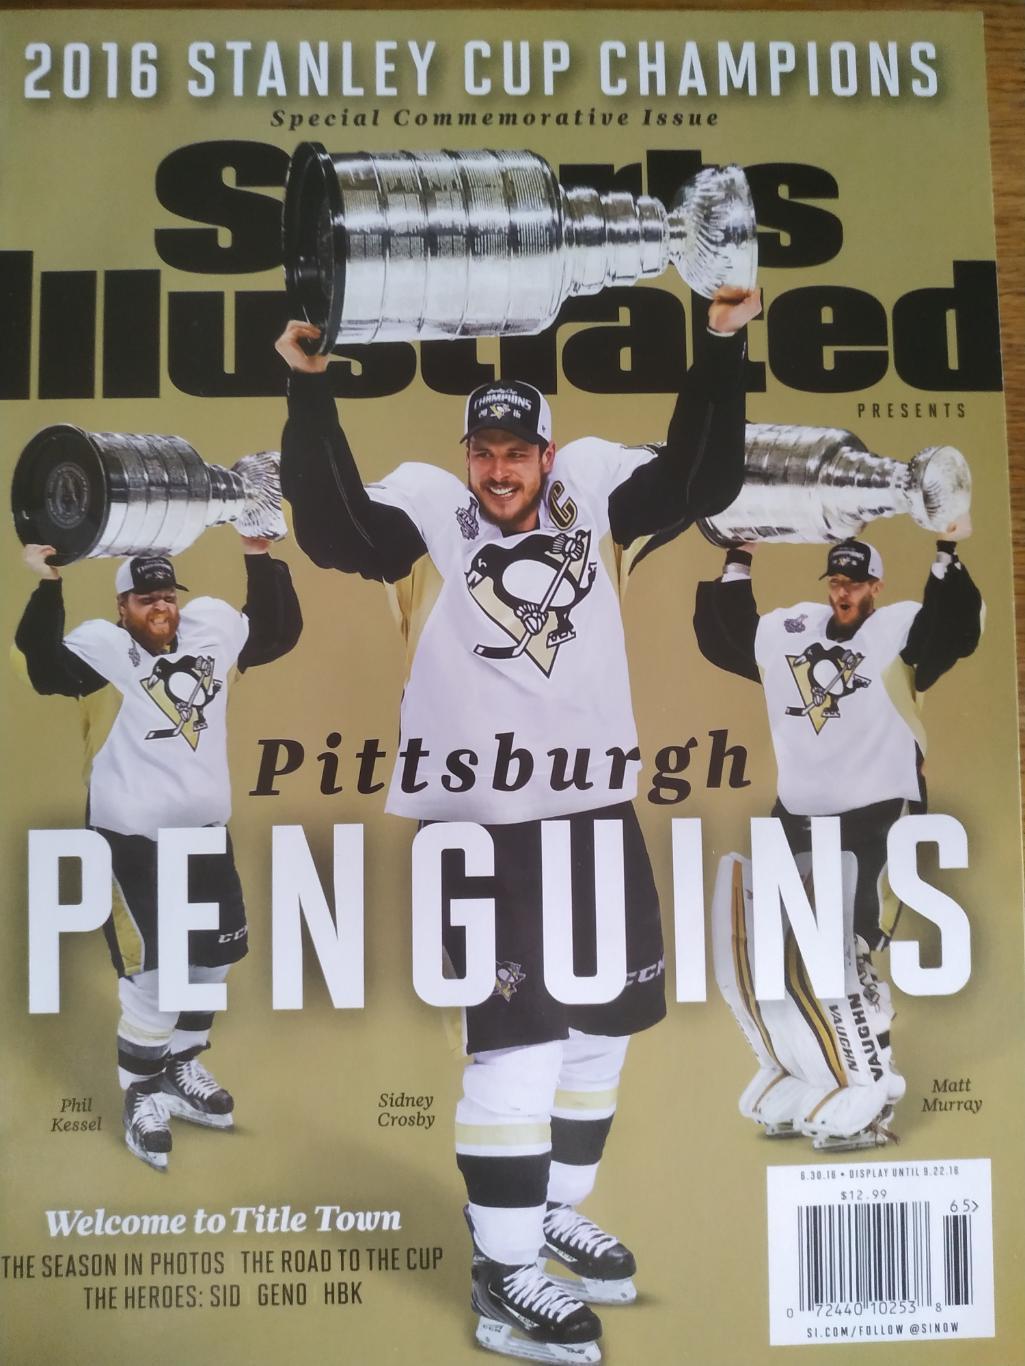 ЖУРНАЛ НХЛ NHL SPORTS ILLUSTRATED 2016 PITTSBURGH PENGUINS STANLEY CUP CHAMPIONS